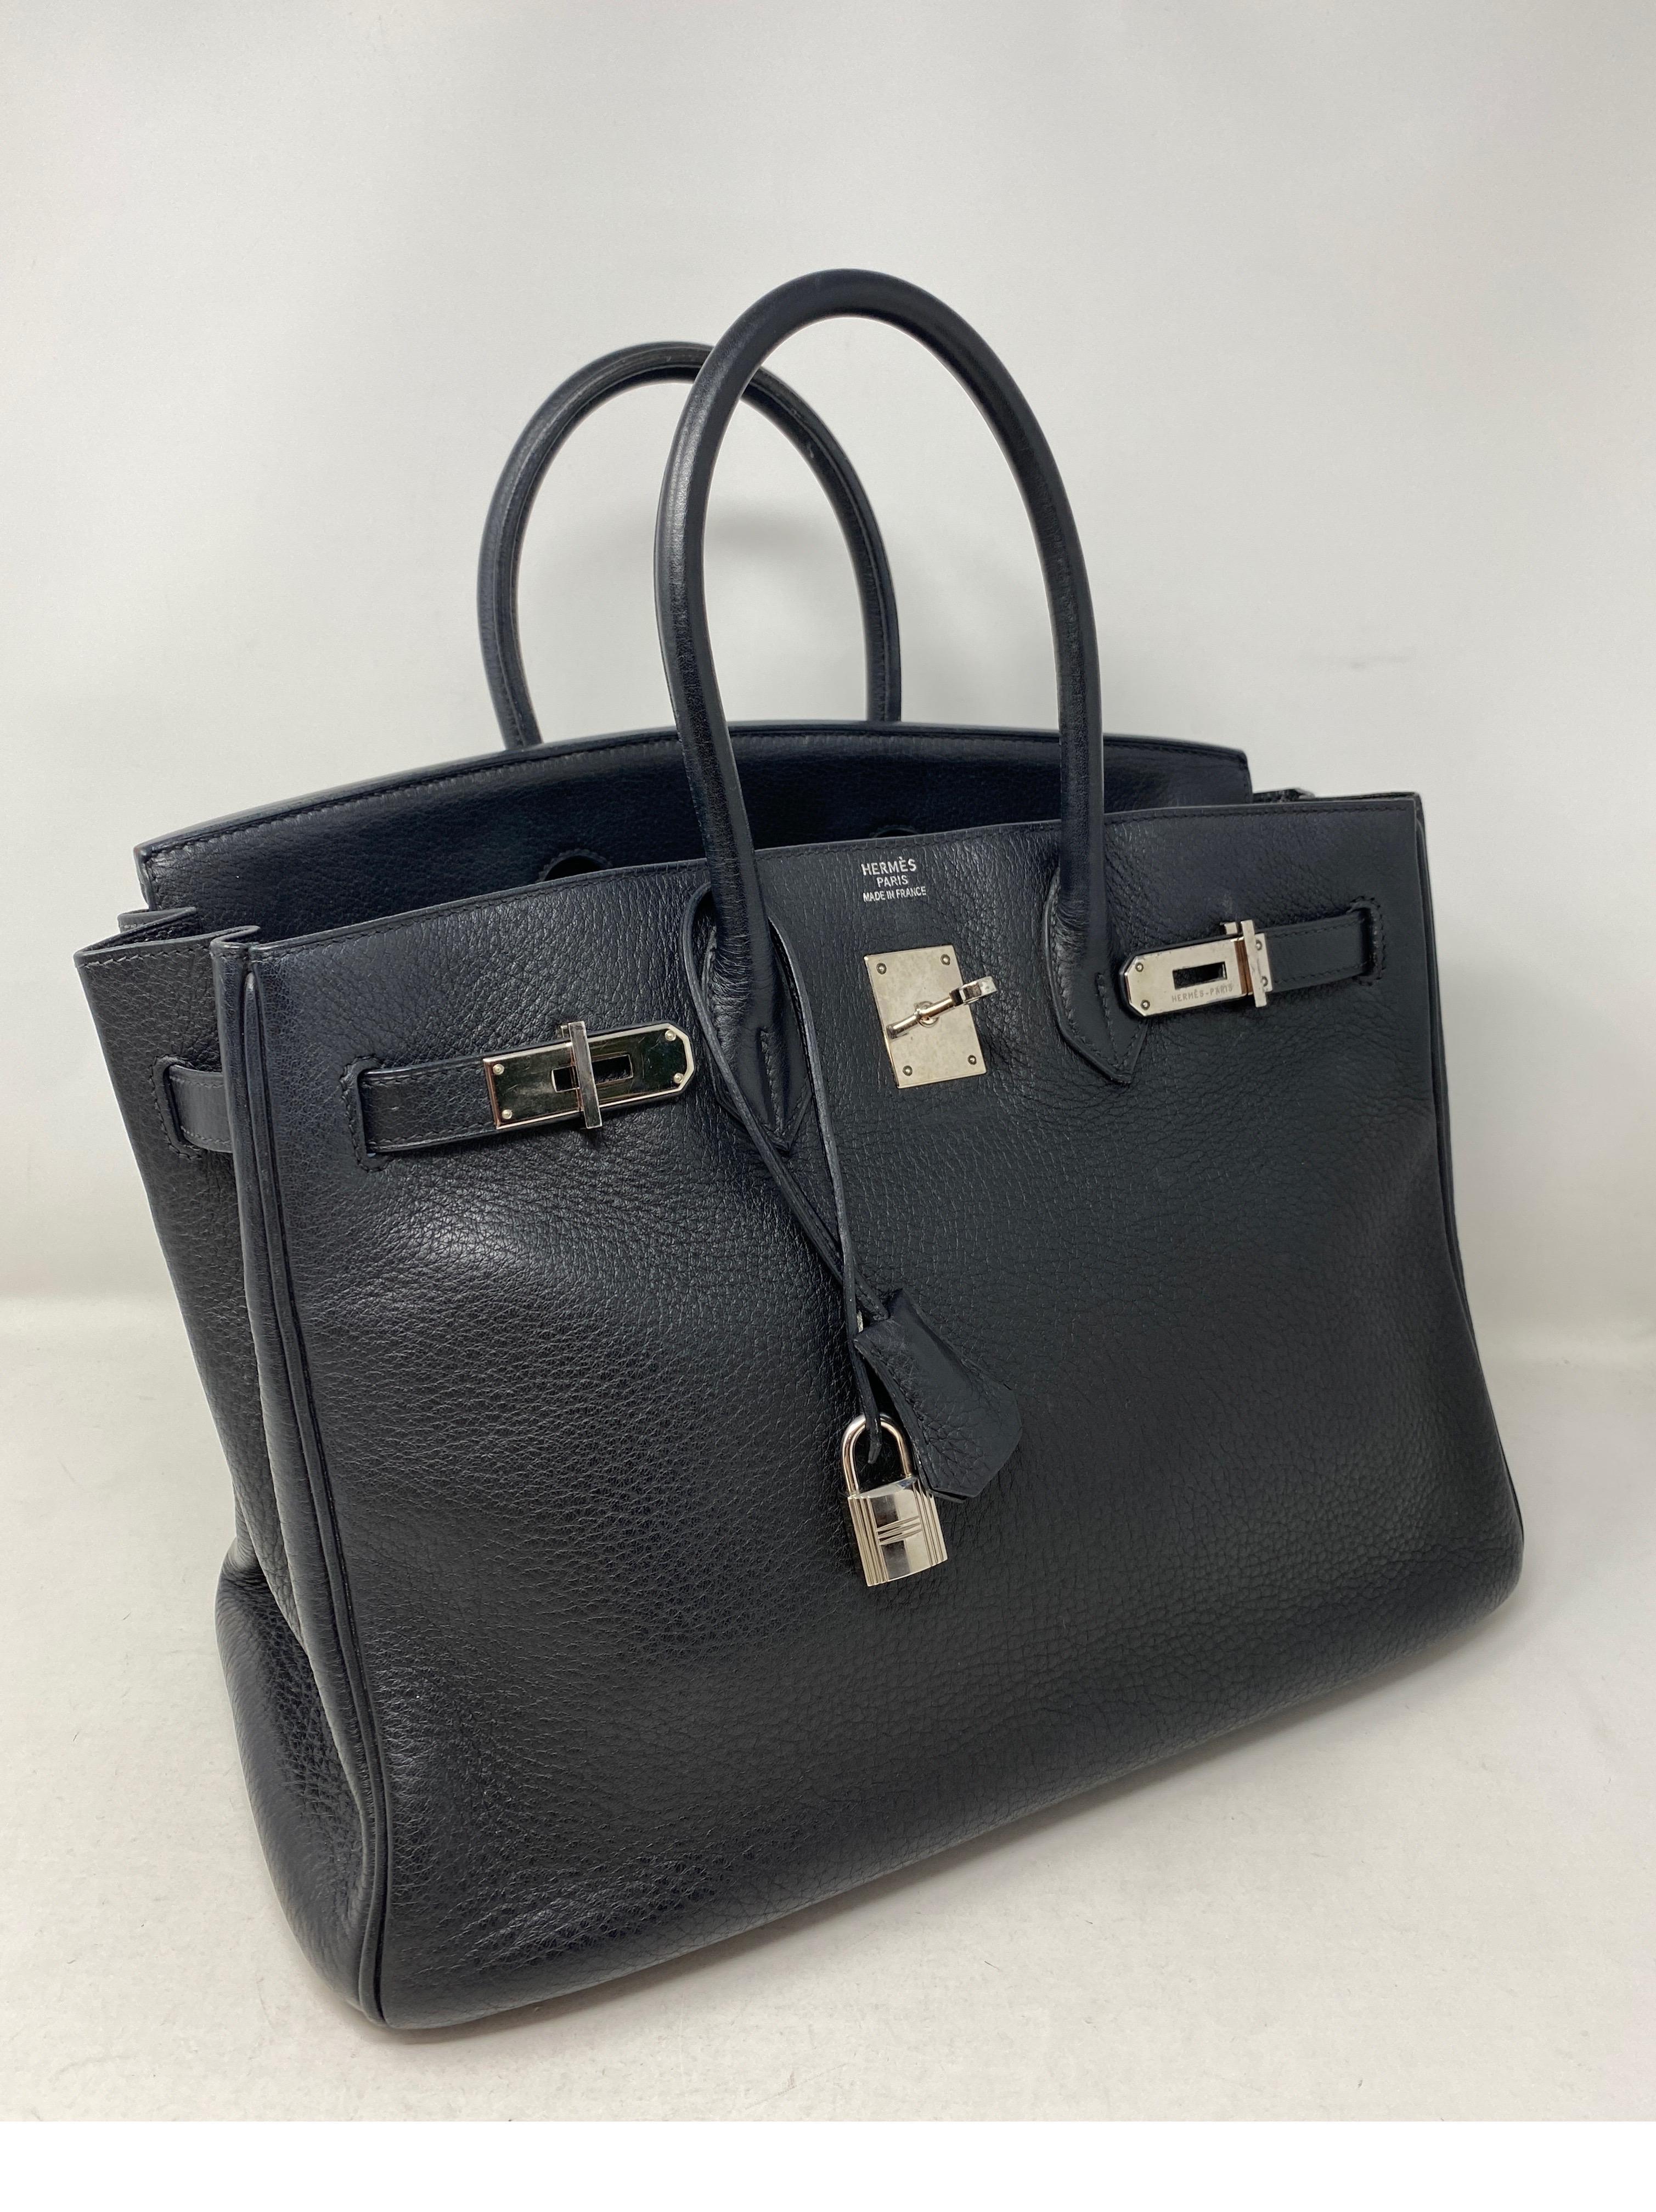 Hermes Black Birkin 35 Bag. Palladium hardware. Some wear throughout. Lots of life left. Still in good condition. Classic black color. Includes clochette, lock, keys and dust cover. Guaranteed authentic. 